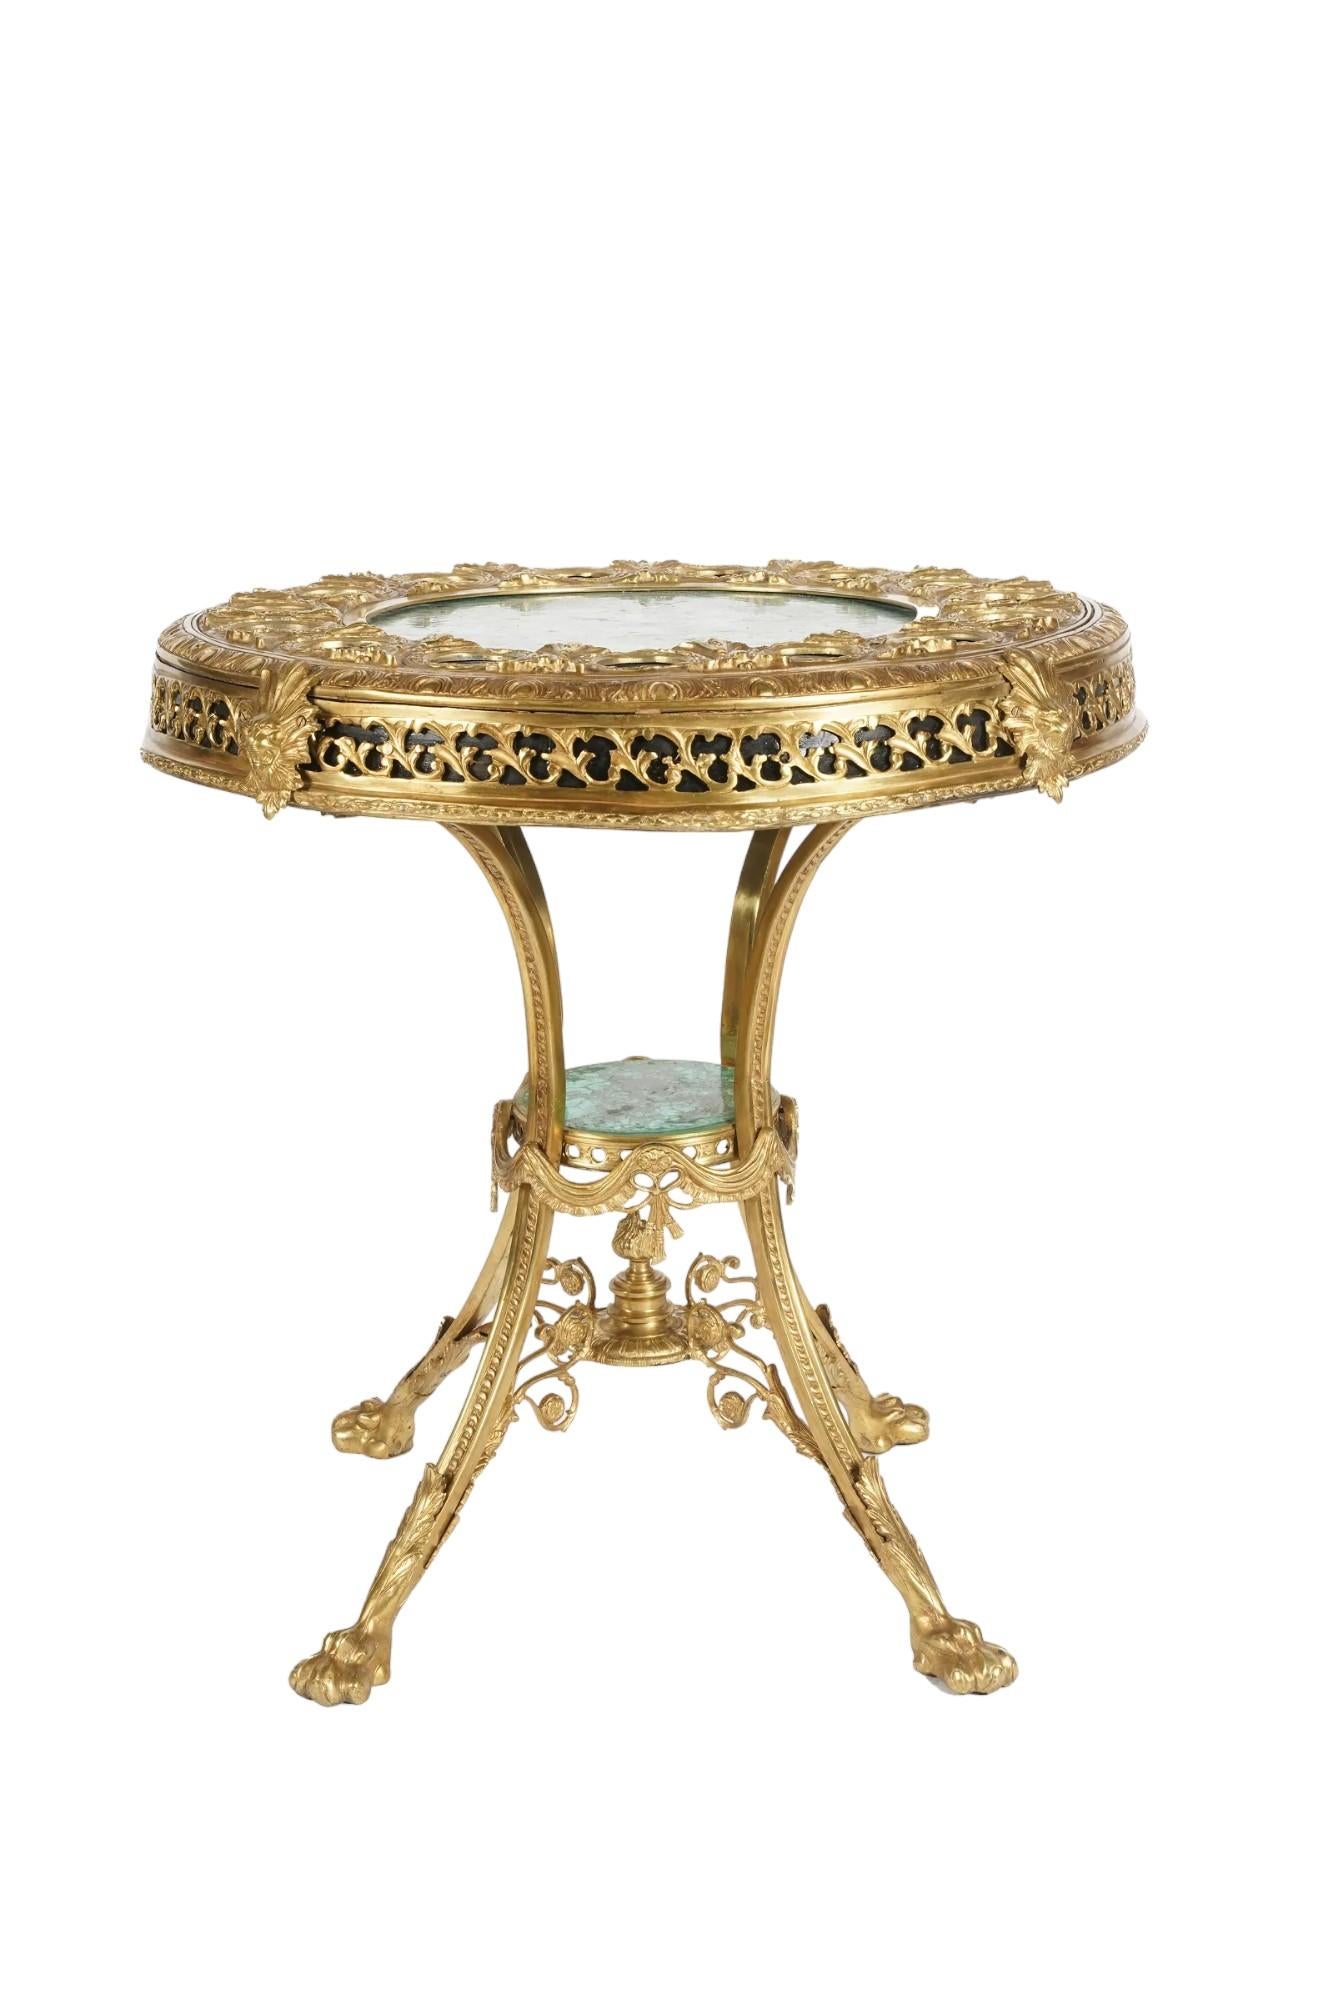 French Provincial 19thc Malachite Empire Style Stone Inlaid Bronze Dore Center Table For Sale